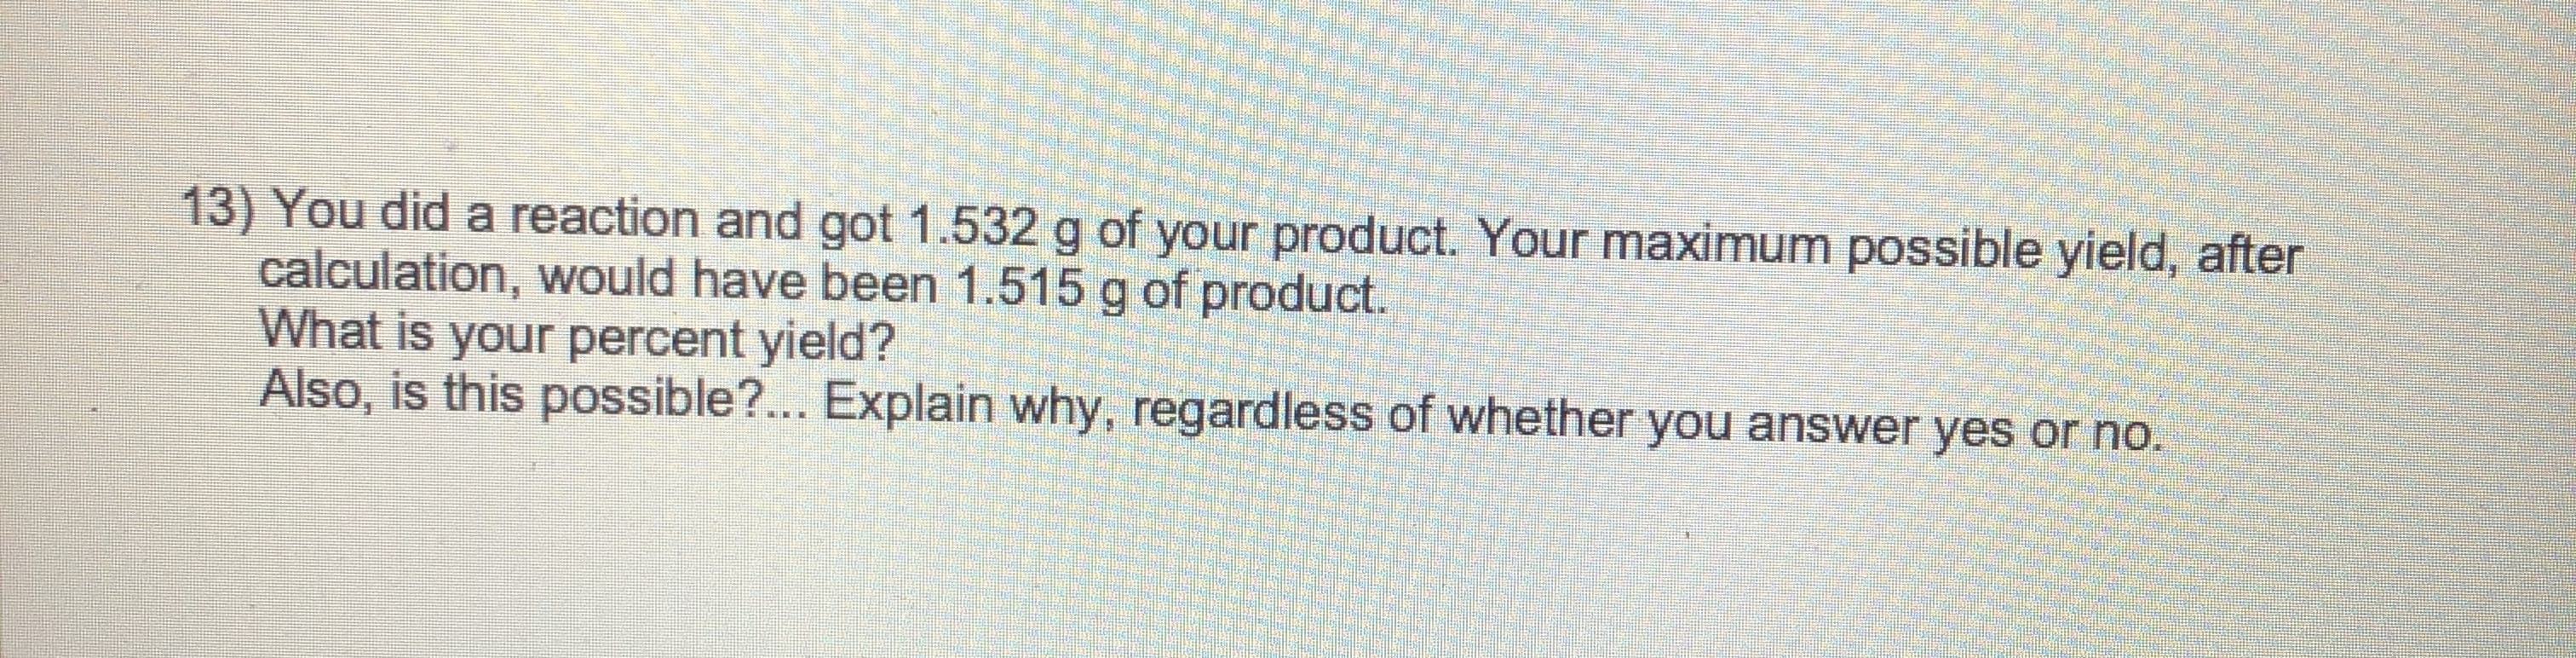 13) You did a reaction and got 1.532 g of your product. Your maximum possible yield, after
calculation, would have been 1.515 g of product.
What is your percent yield?
Also, is this possible?.. Explain why, regardless of whether you answer yes or no.
